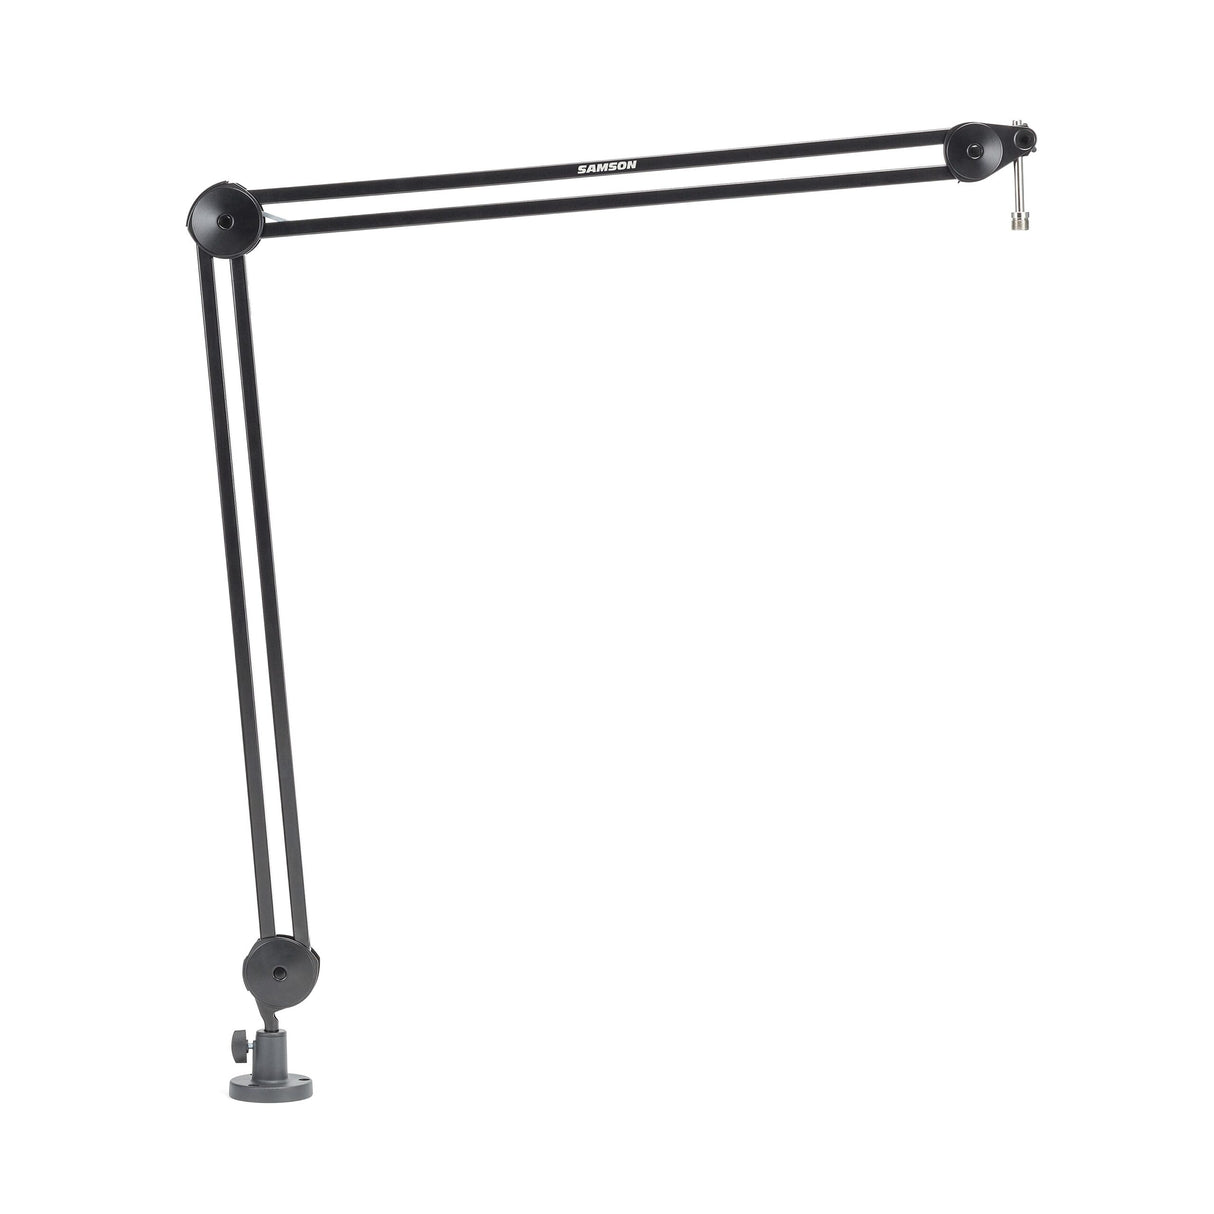 Samson Microphone Boom Arm Stand, 48 Inches